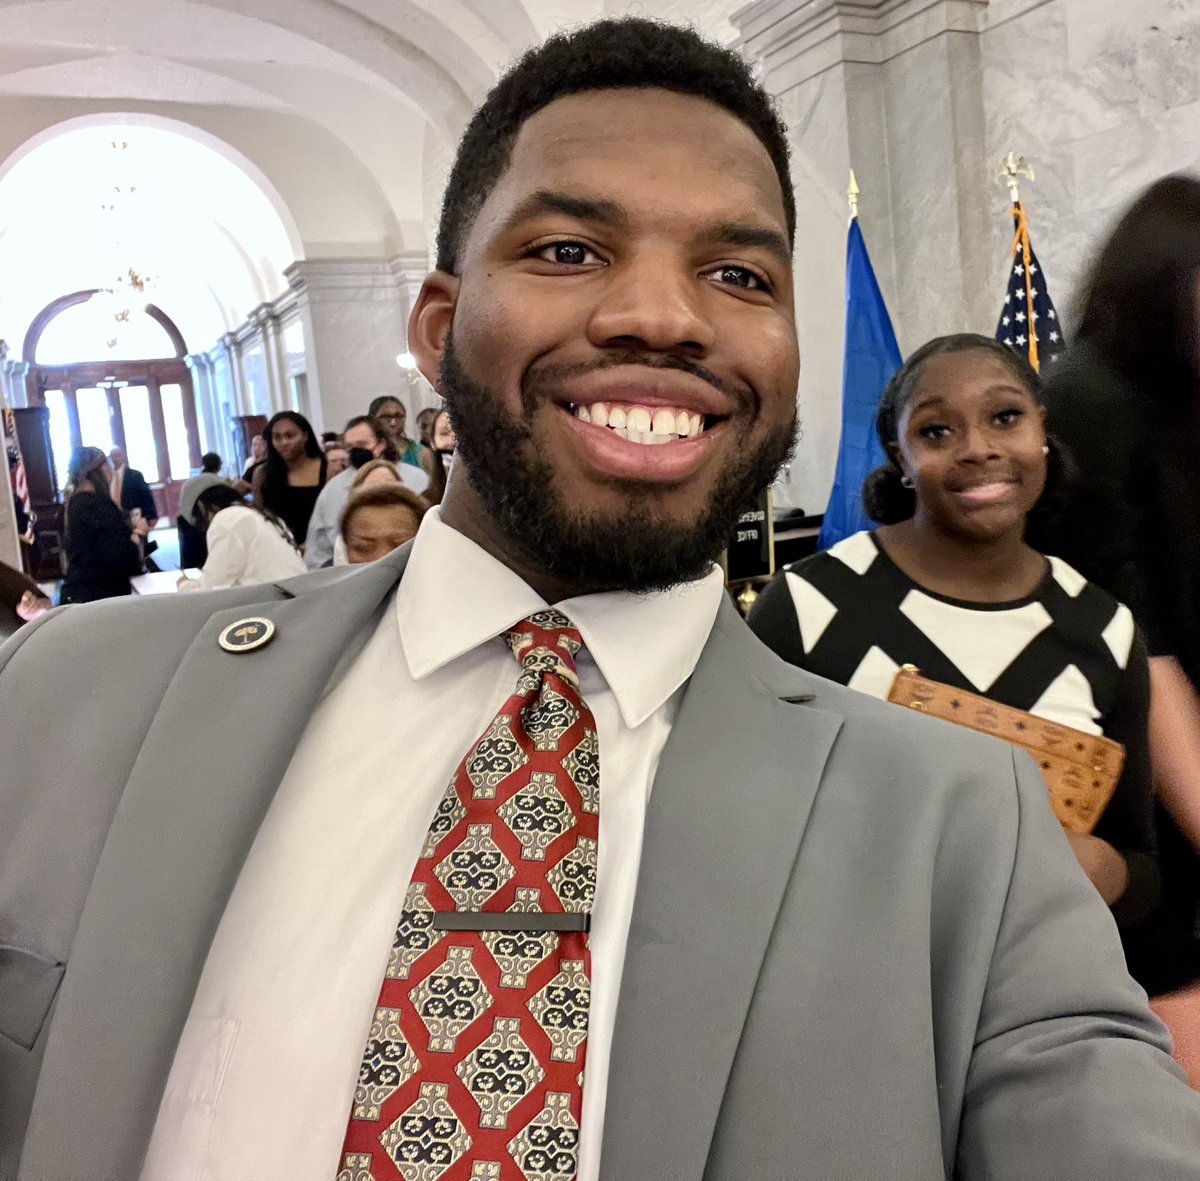 THE CHAMP IS HERE! It was great having @GamecockWBB here at the capitol. Congrats on bringing home another National title. 🏆🏀🐔 @aa_boston @QueenBrea_1 @HollywoodRaven @dh3so3hd